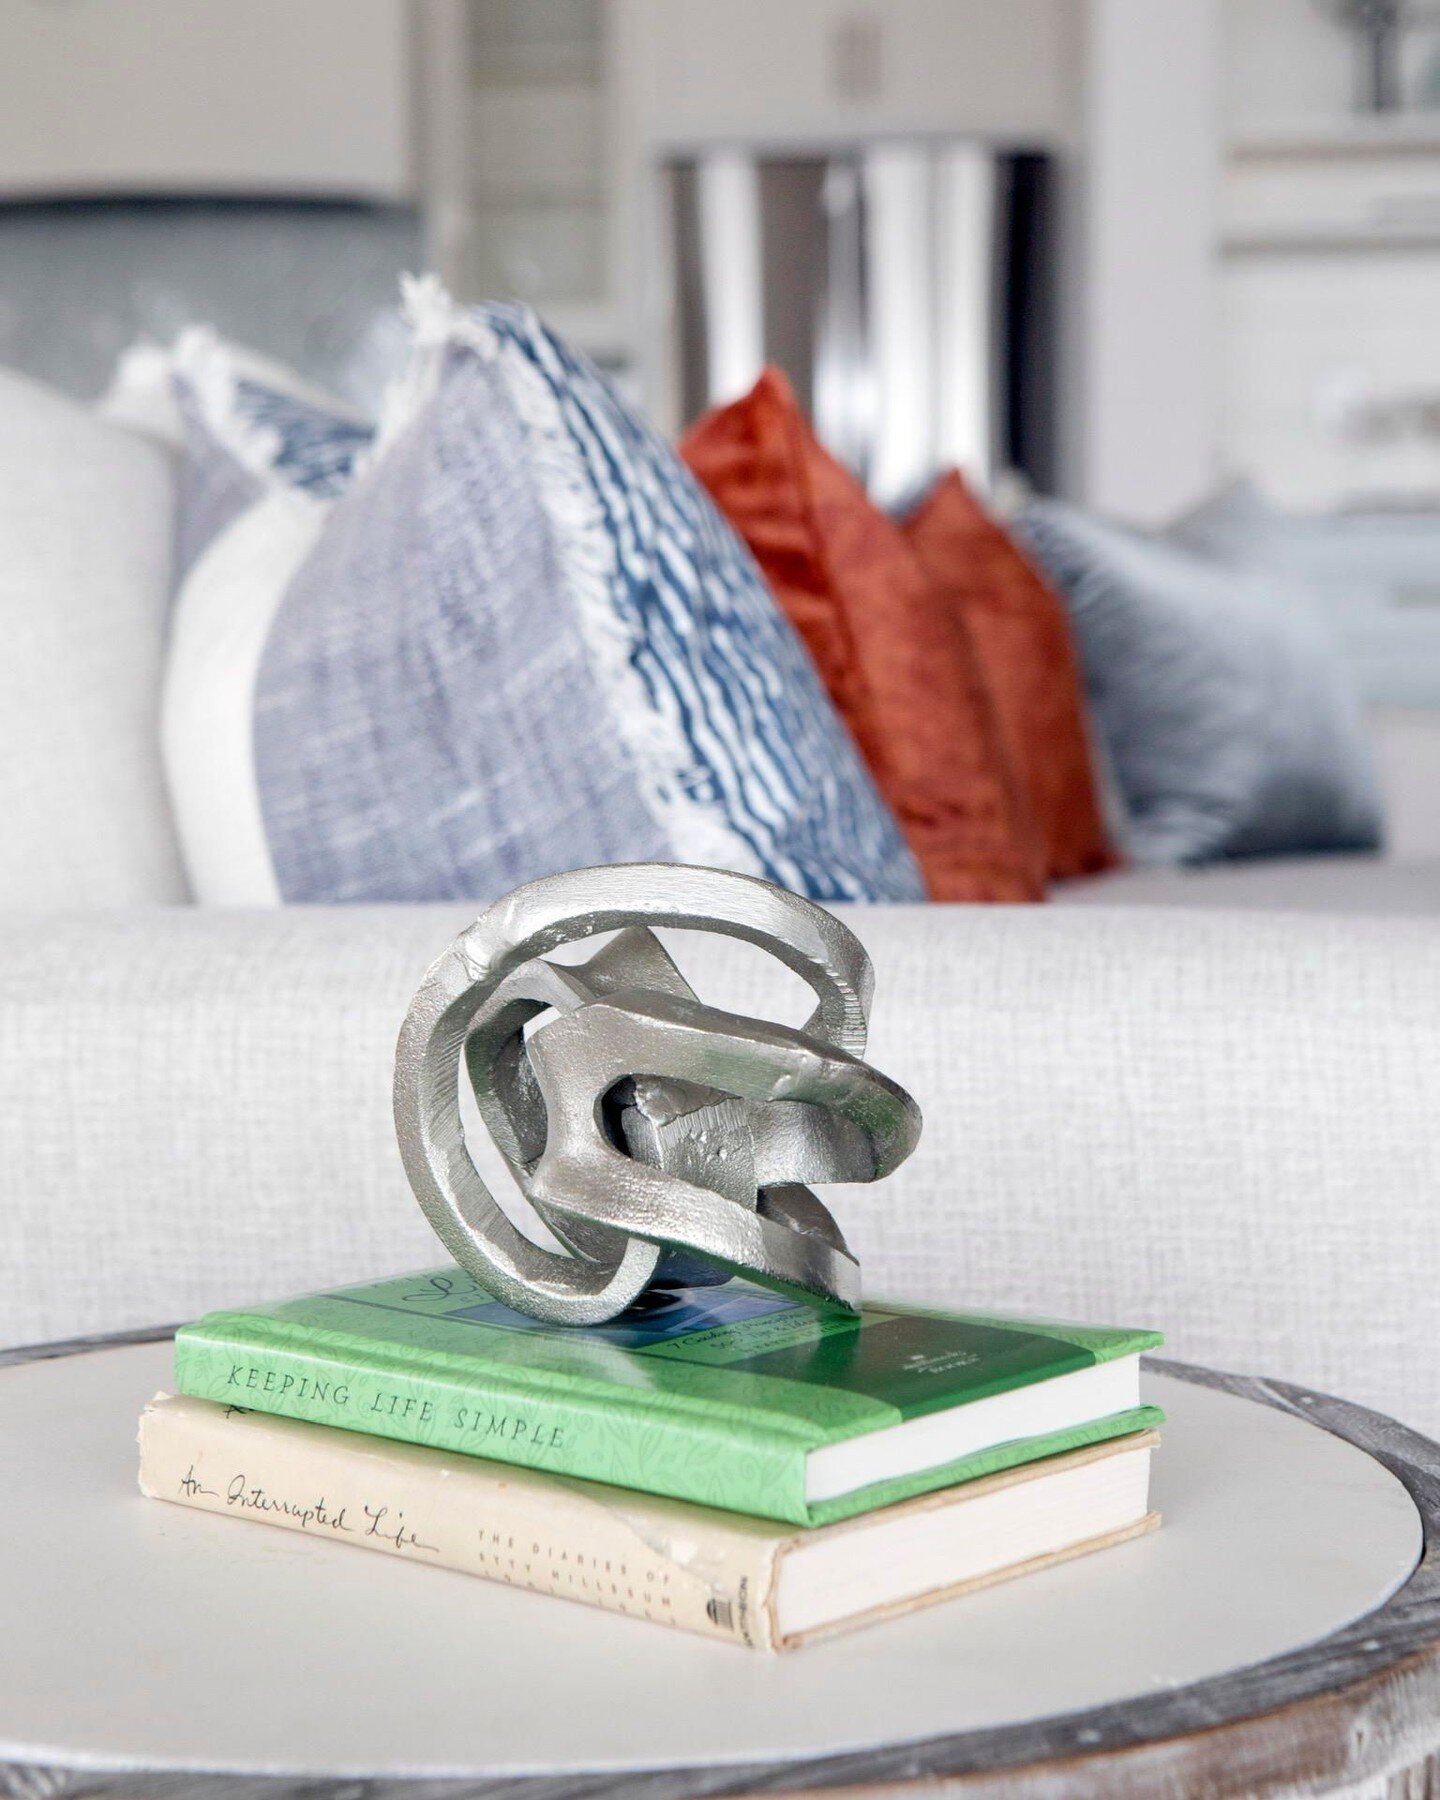 There so many options for coffee table decor. This polished chrome structure adds a really unique look to this side table. It&rsquo;s not too much to take away from the colorful pillows on the couch, it blends in perfectly! Shop similar items on my L